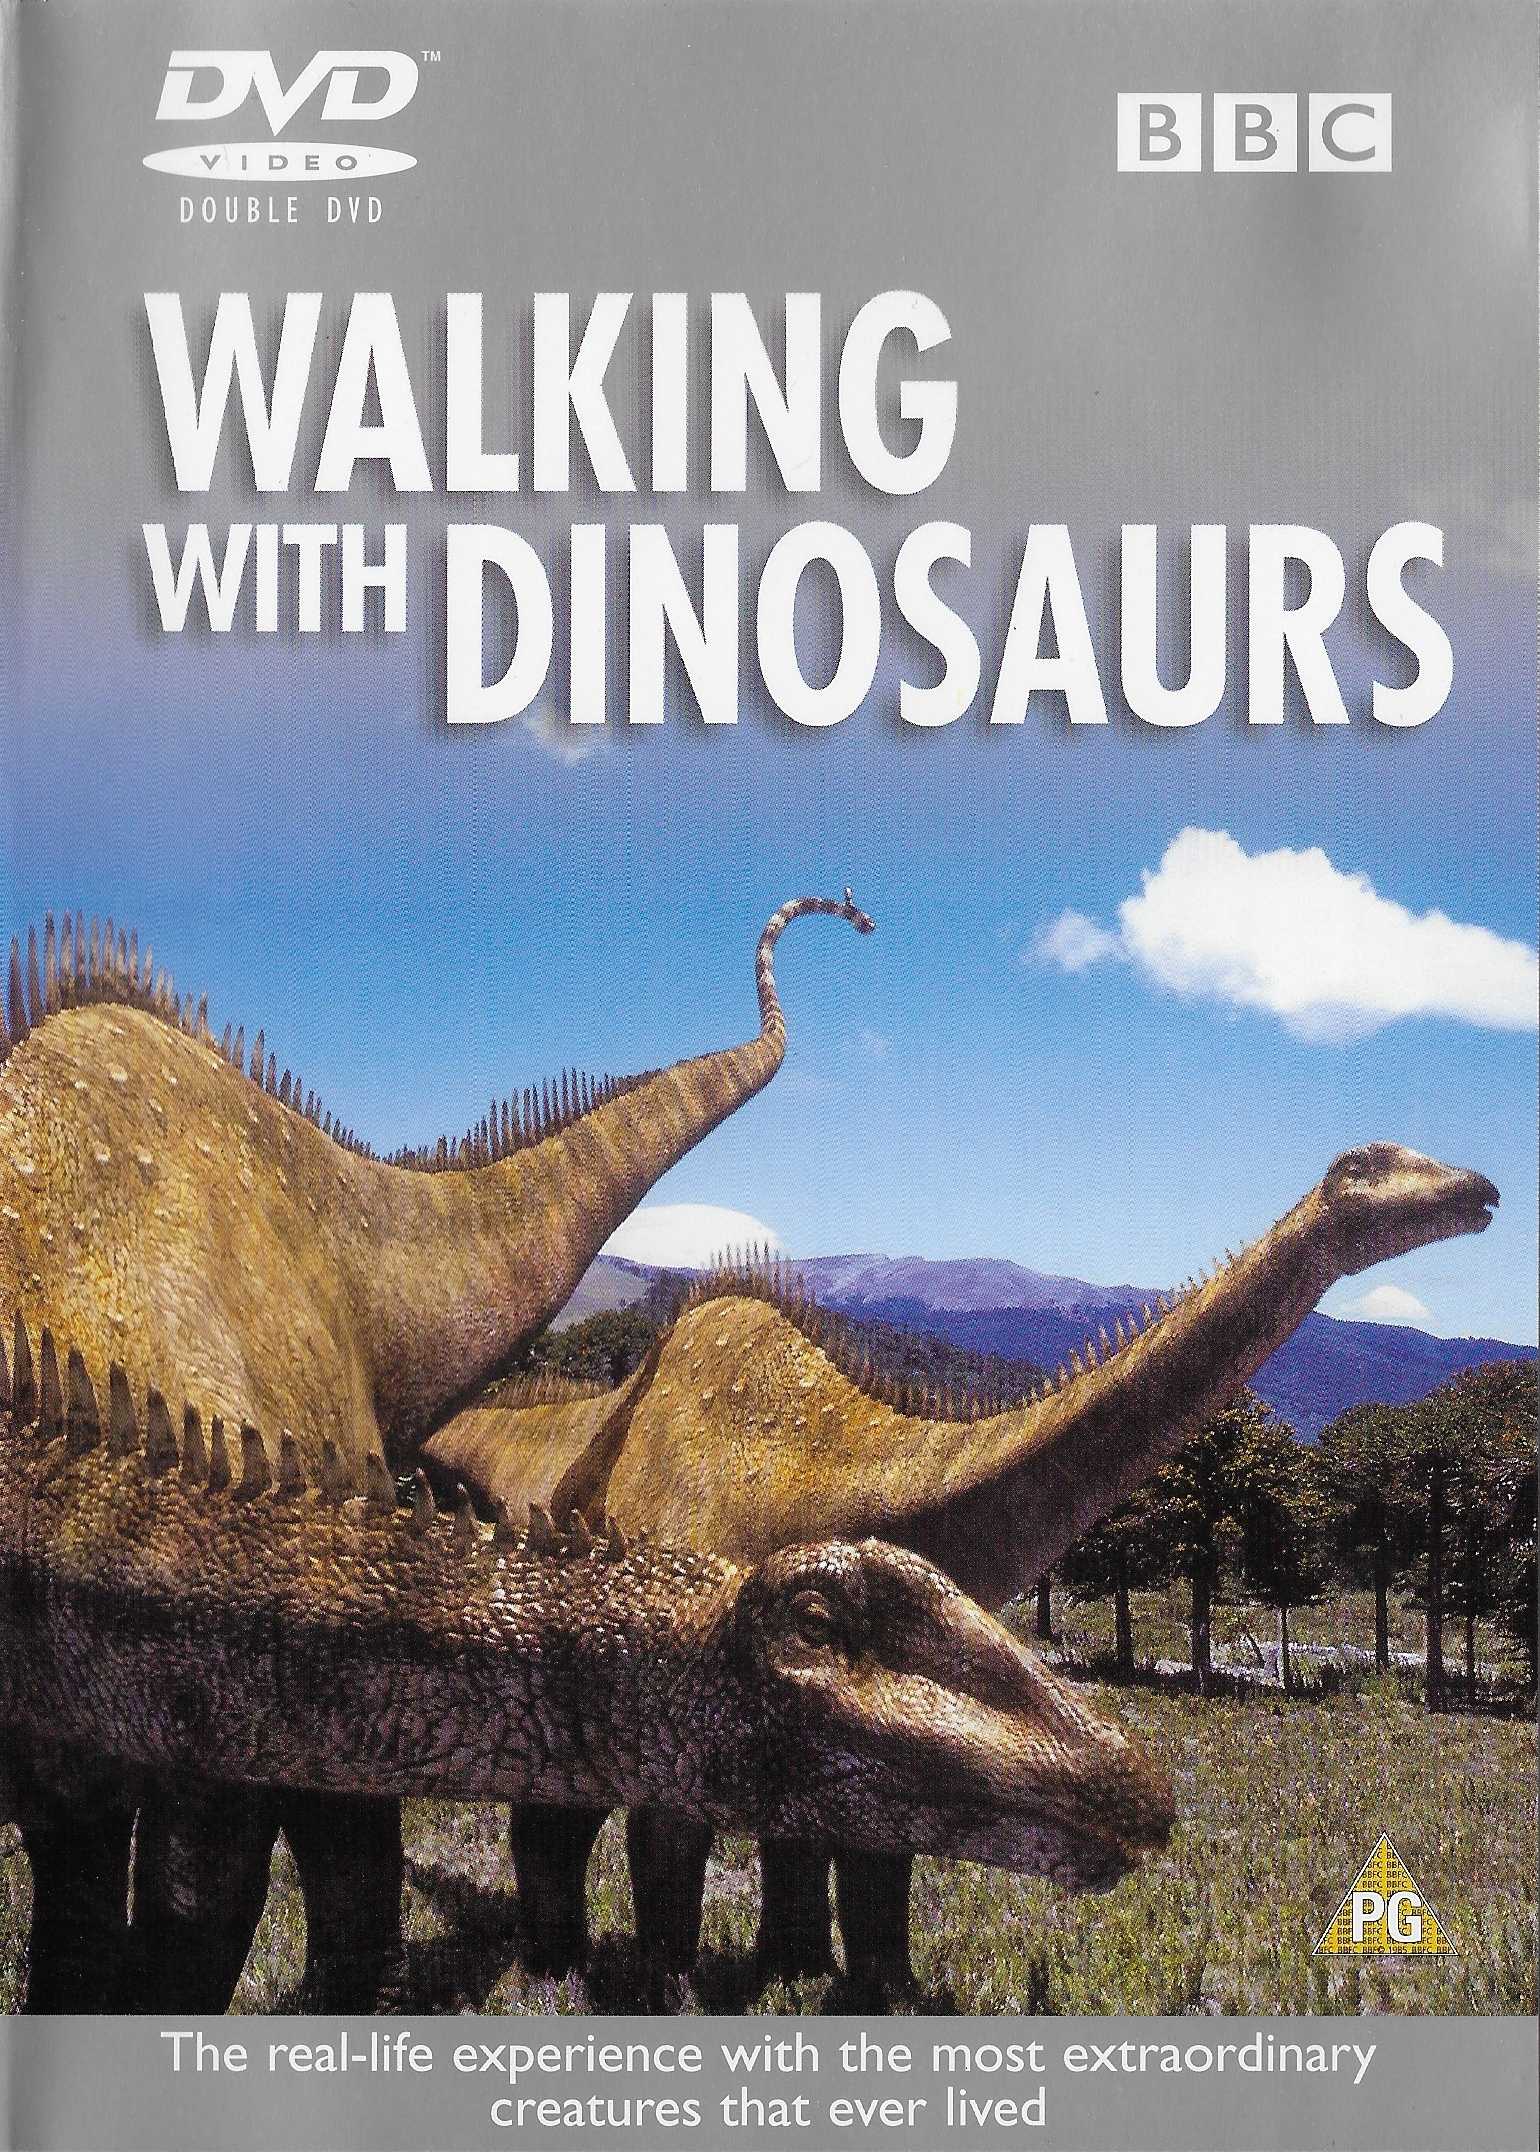 Picture of Walking with dinosaurs by artist Kenneth Branagh from the BBC dvds - Records and Tapes library